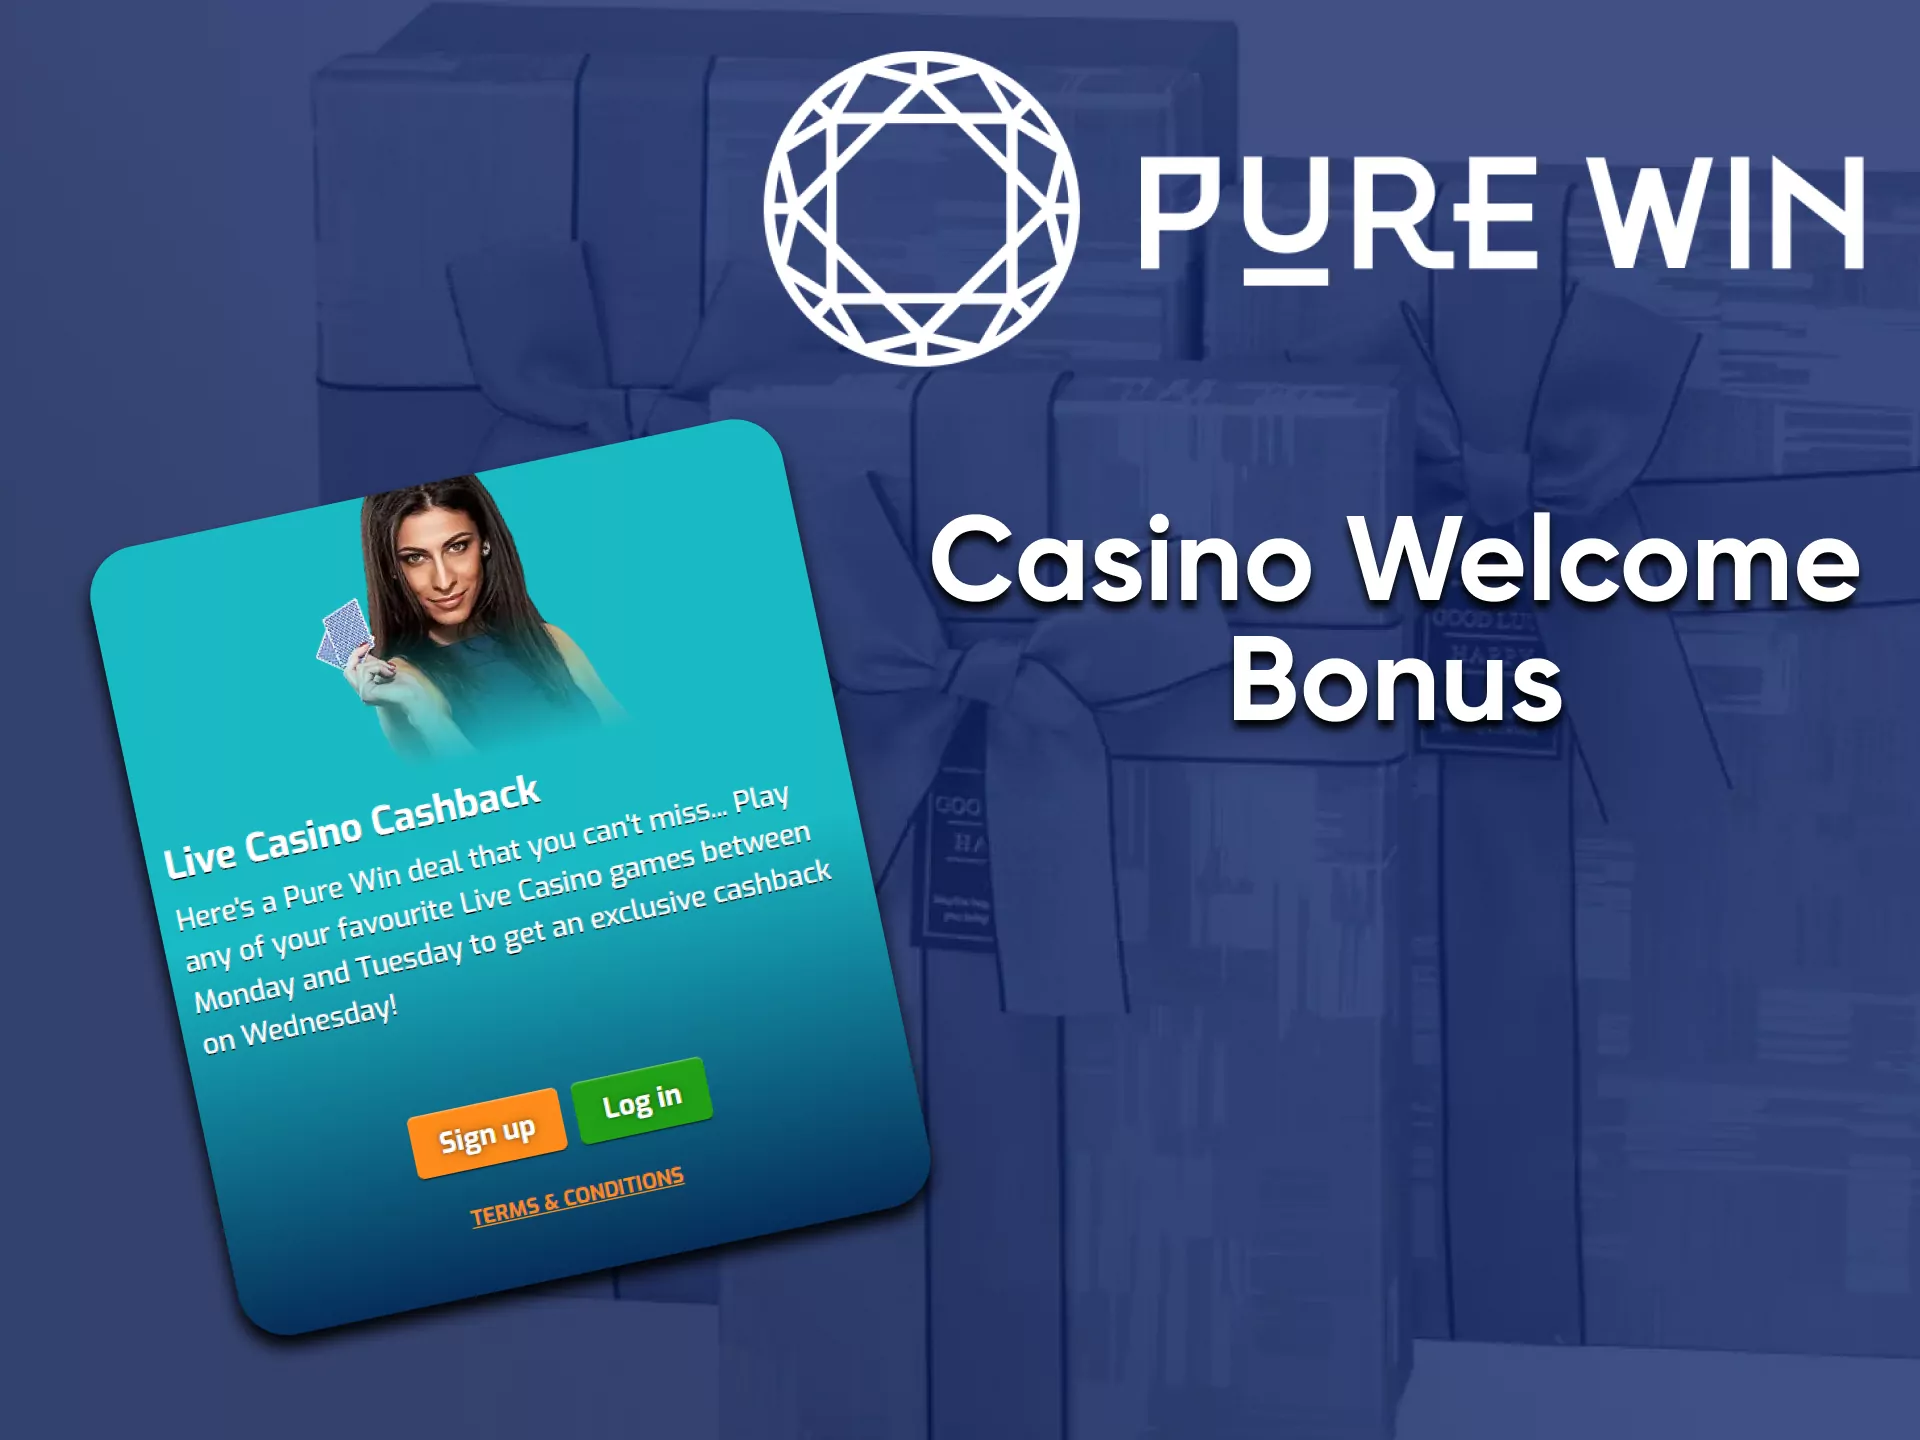 Replenish your account to receive a bonus from Pure Win.